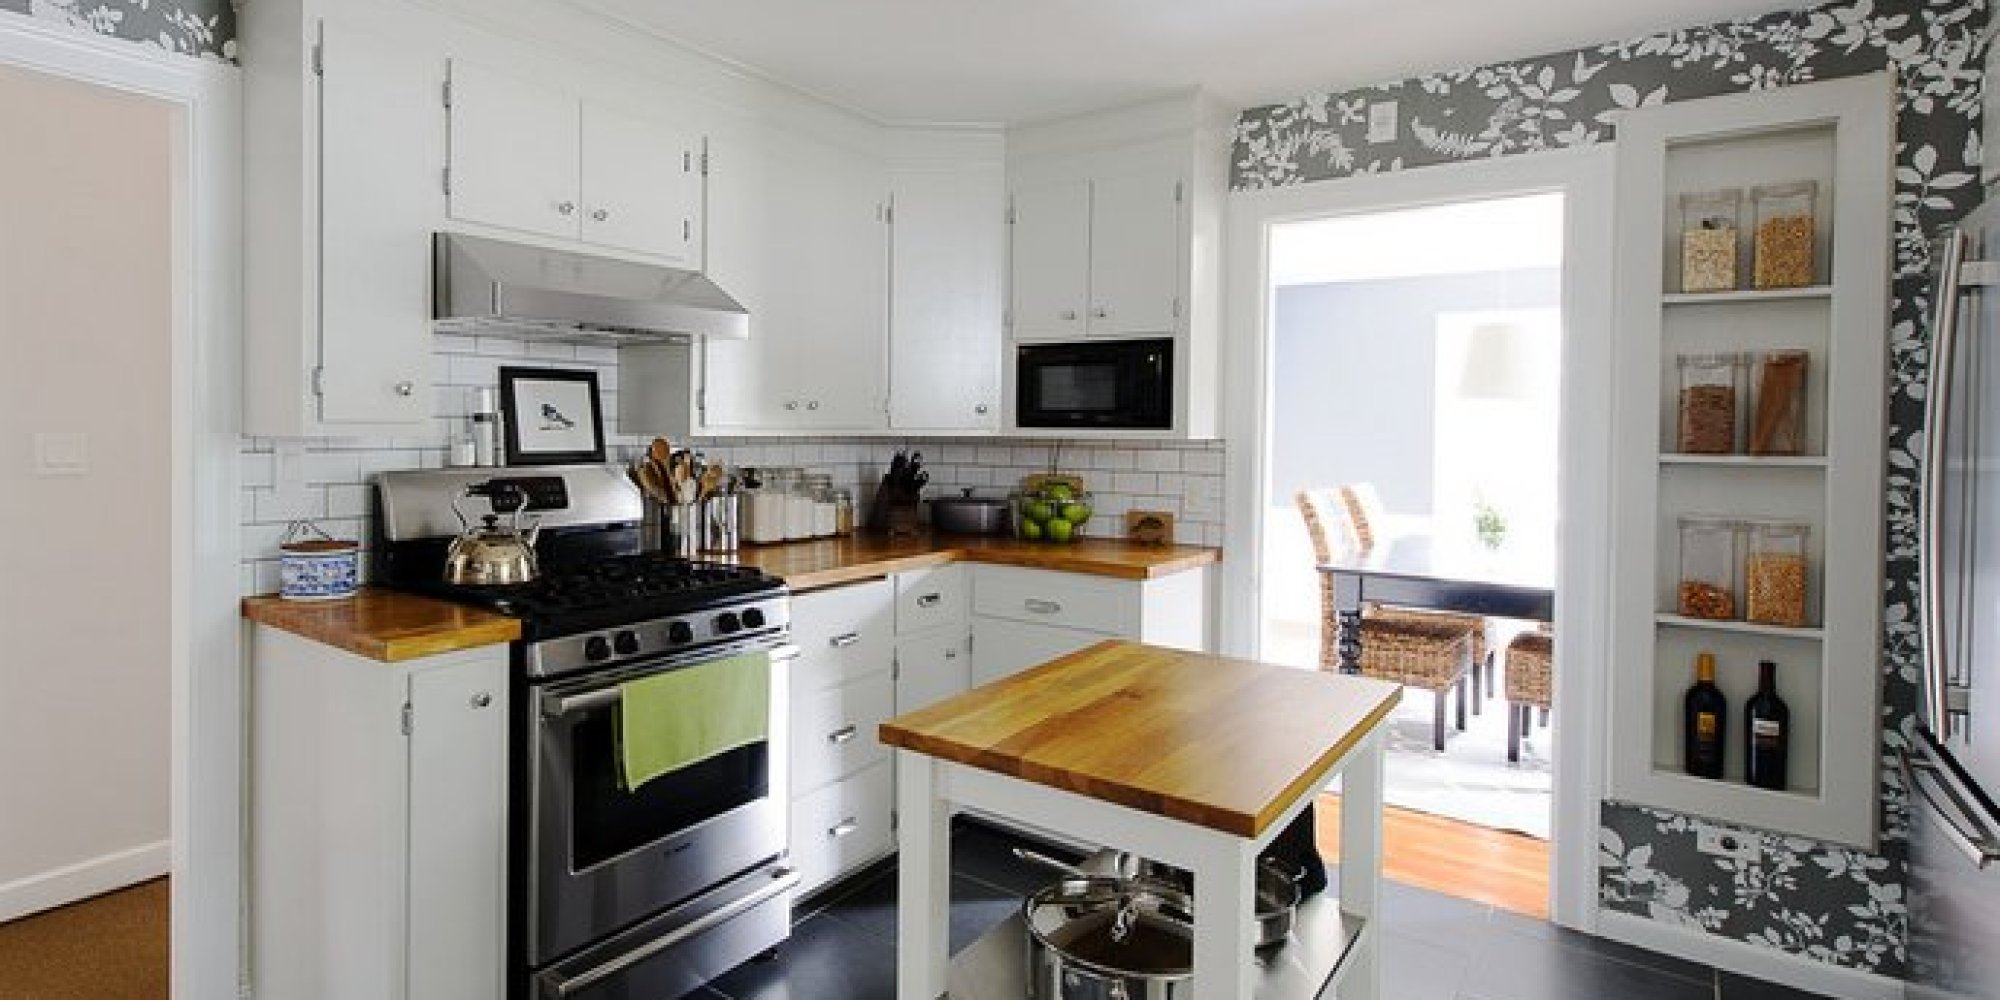 19 Inexpensive Ways To Fix Up Your Kitchen (PHOTOS) | HuffPost